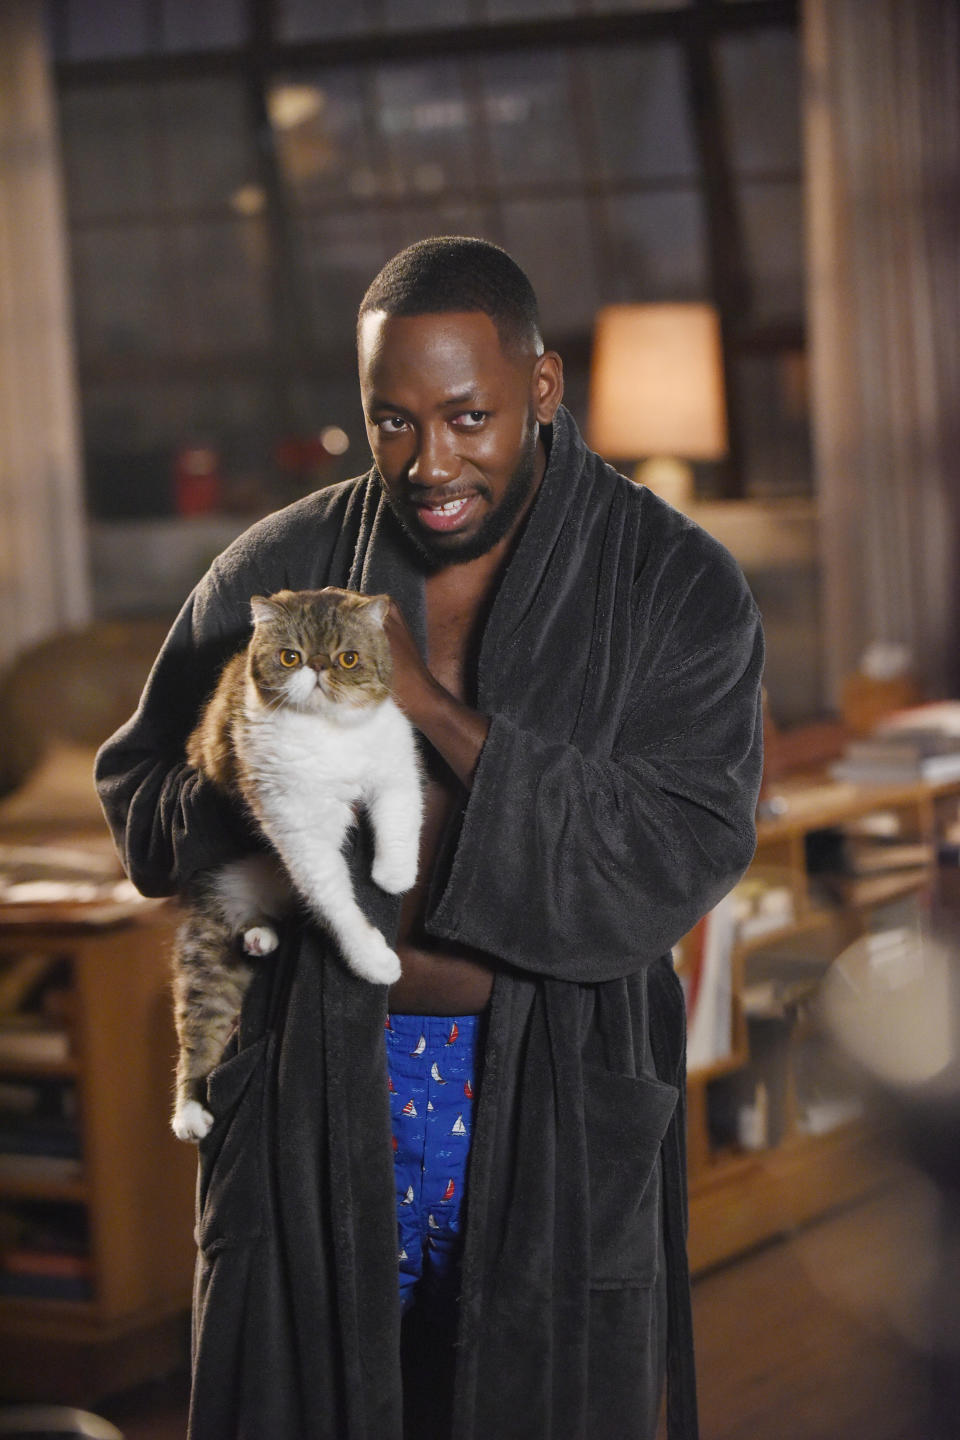 his character in a robe holding his cat